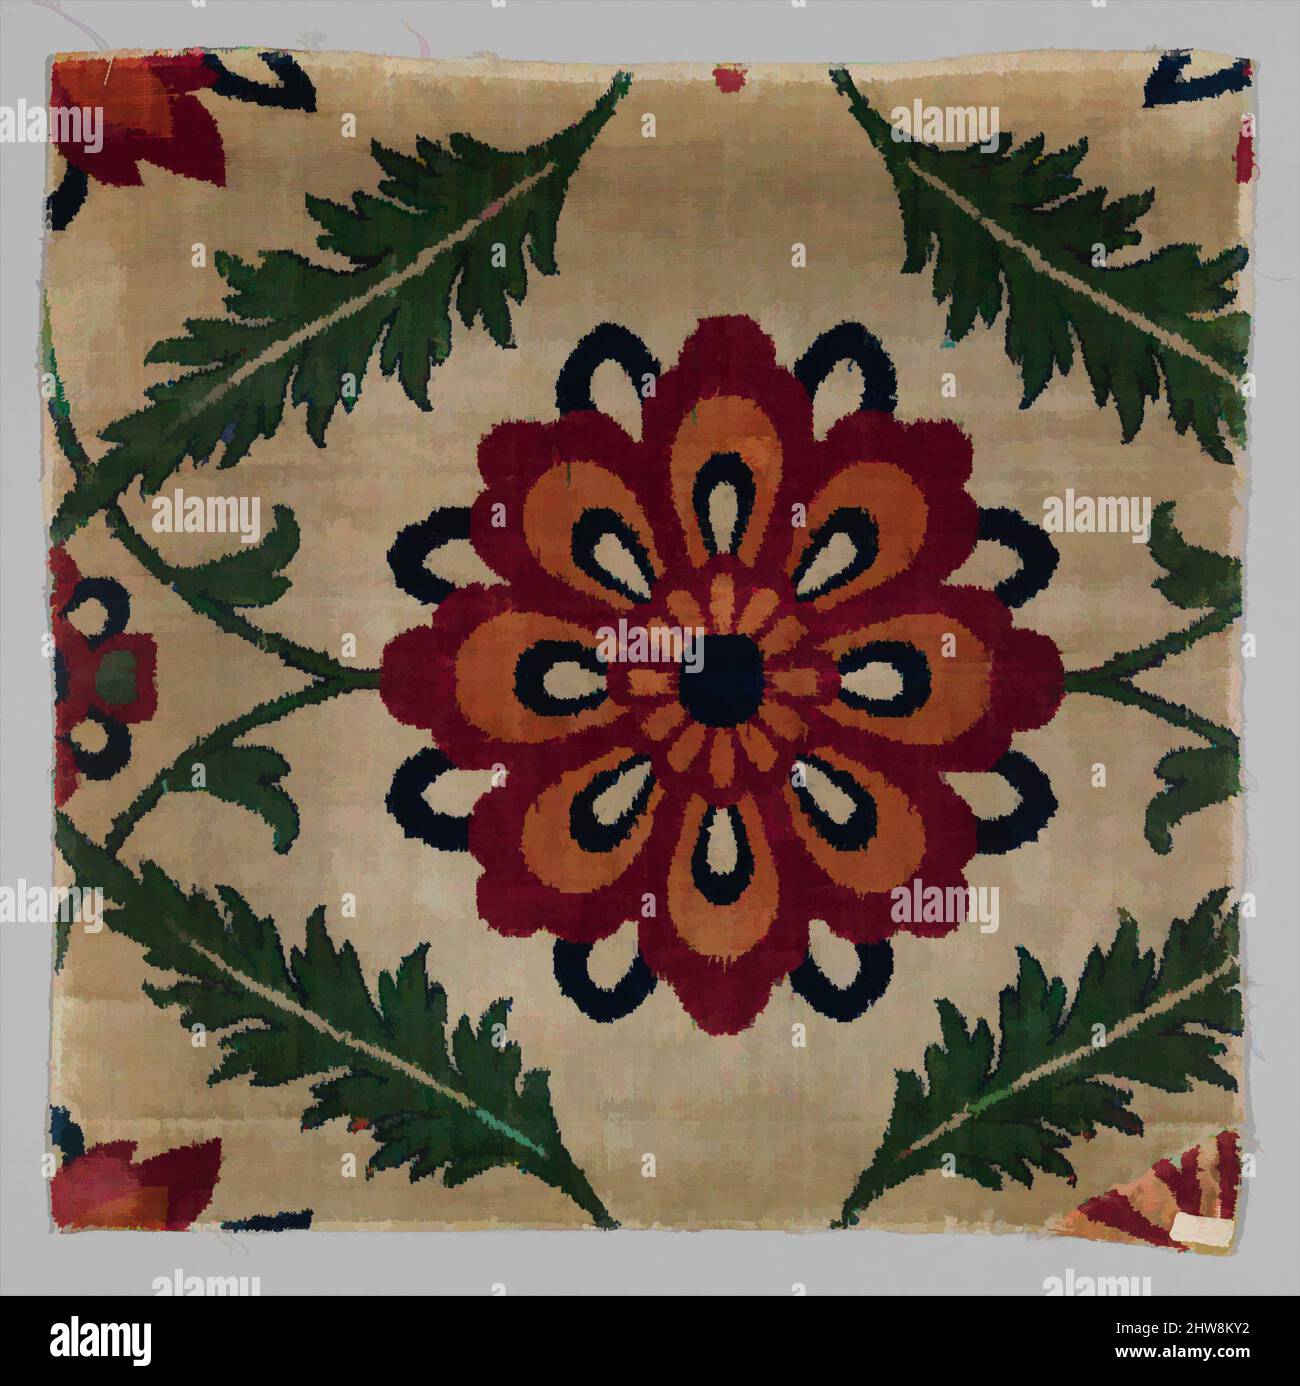 Art inspired by Fragment of a White-Ground Velvet Carpet, 17th century, Attributed to India, Silk, linen; cut velvet, Textile: H. 14 in. (35.6 cm), Textiles-Woven, Carpets composed of flowers and vines arranged on neutral backgrounds were produced in great numbers during the reign of, Classic works modernized by Artotop with a splash of modernity. Shapes, color and value, eye-catching visual impact on art. Emotions through freedom of artworks in a contemporary way. A timeless message pursuing a wildly creative new direction. Artists turning to the digital medium and creating the Artotop NFT Stock Photo